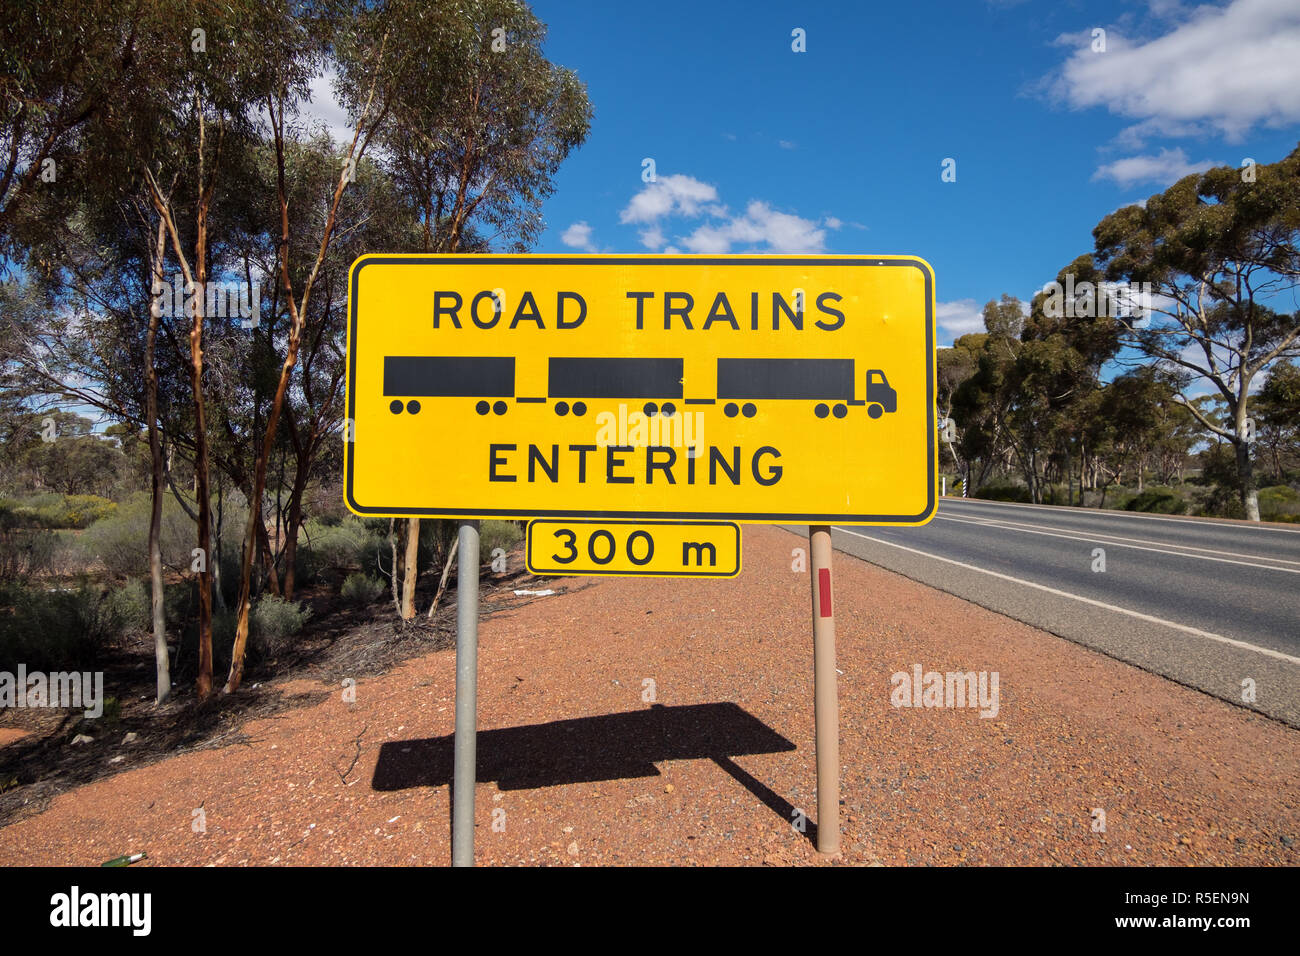 A Road Train warning sign in rural Western Australia. Stock Photo